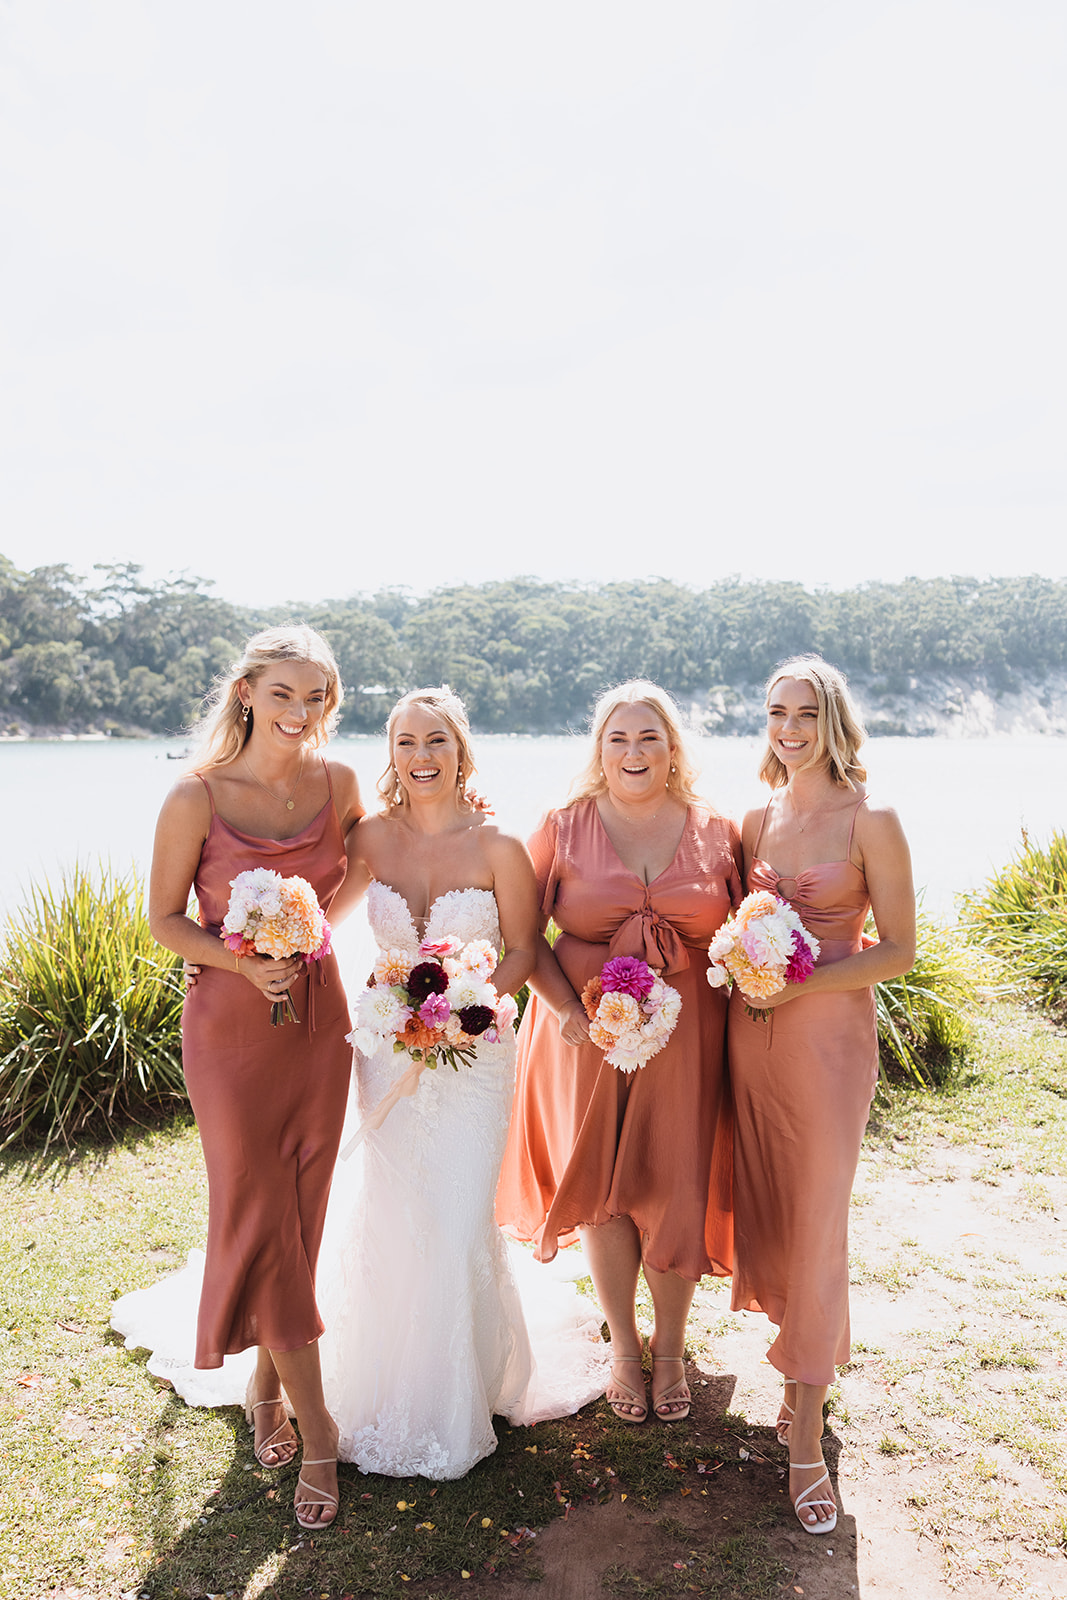 Bridal Party at the Wedding in The Cove Jervis Bay